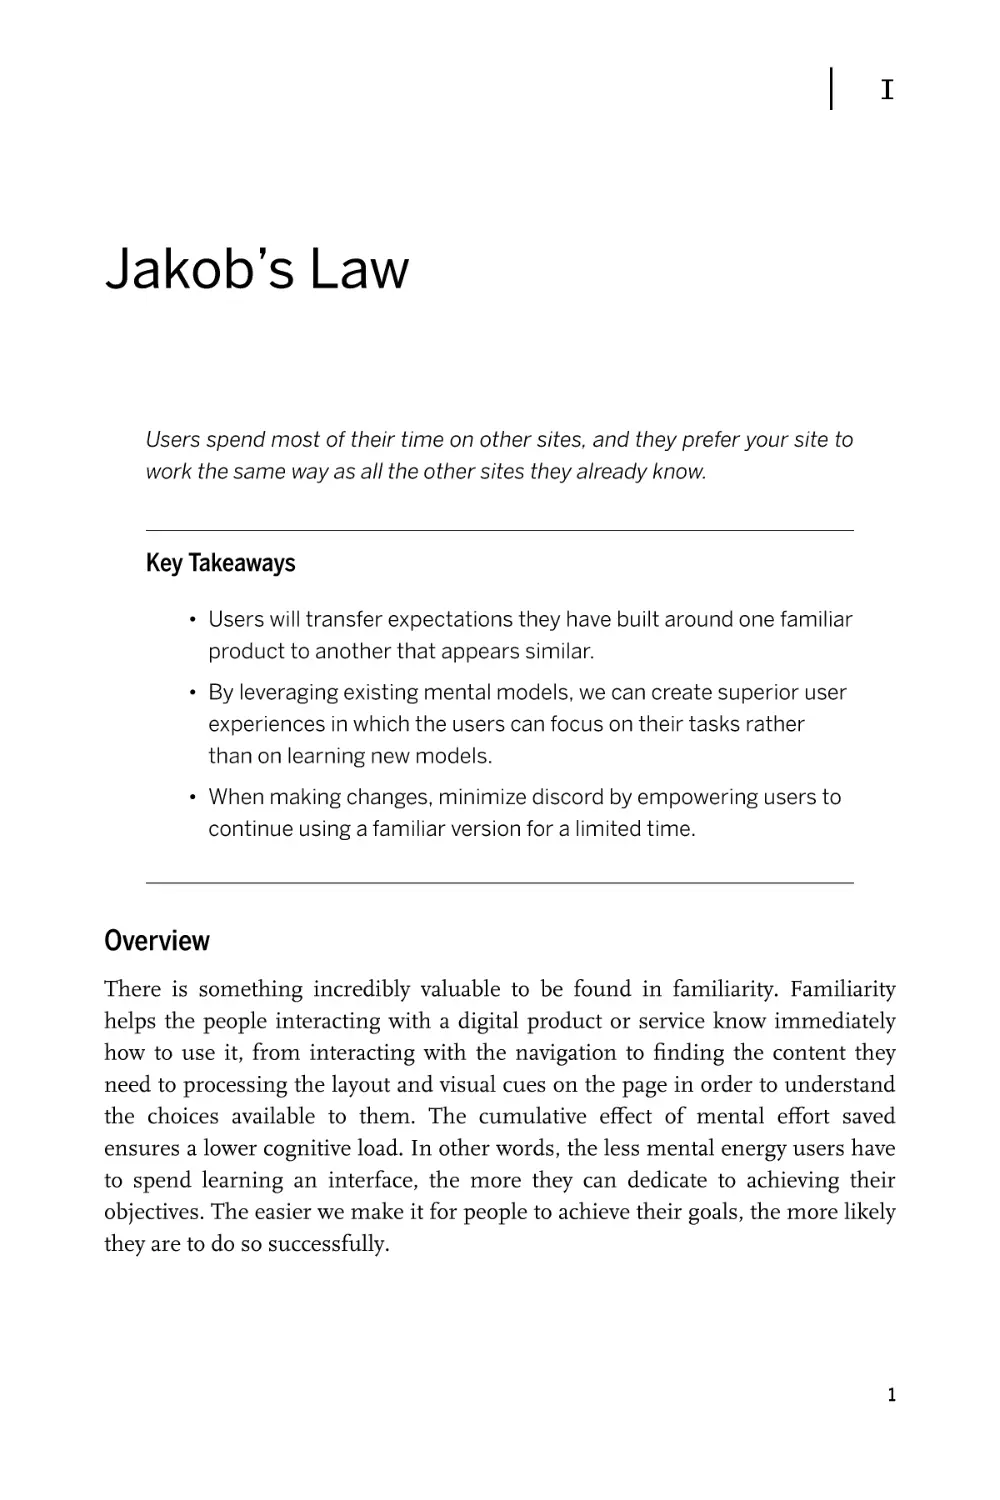 Chapter 1. Jakob’s Law
Overview